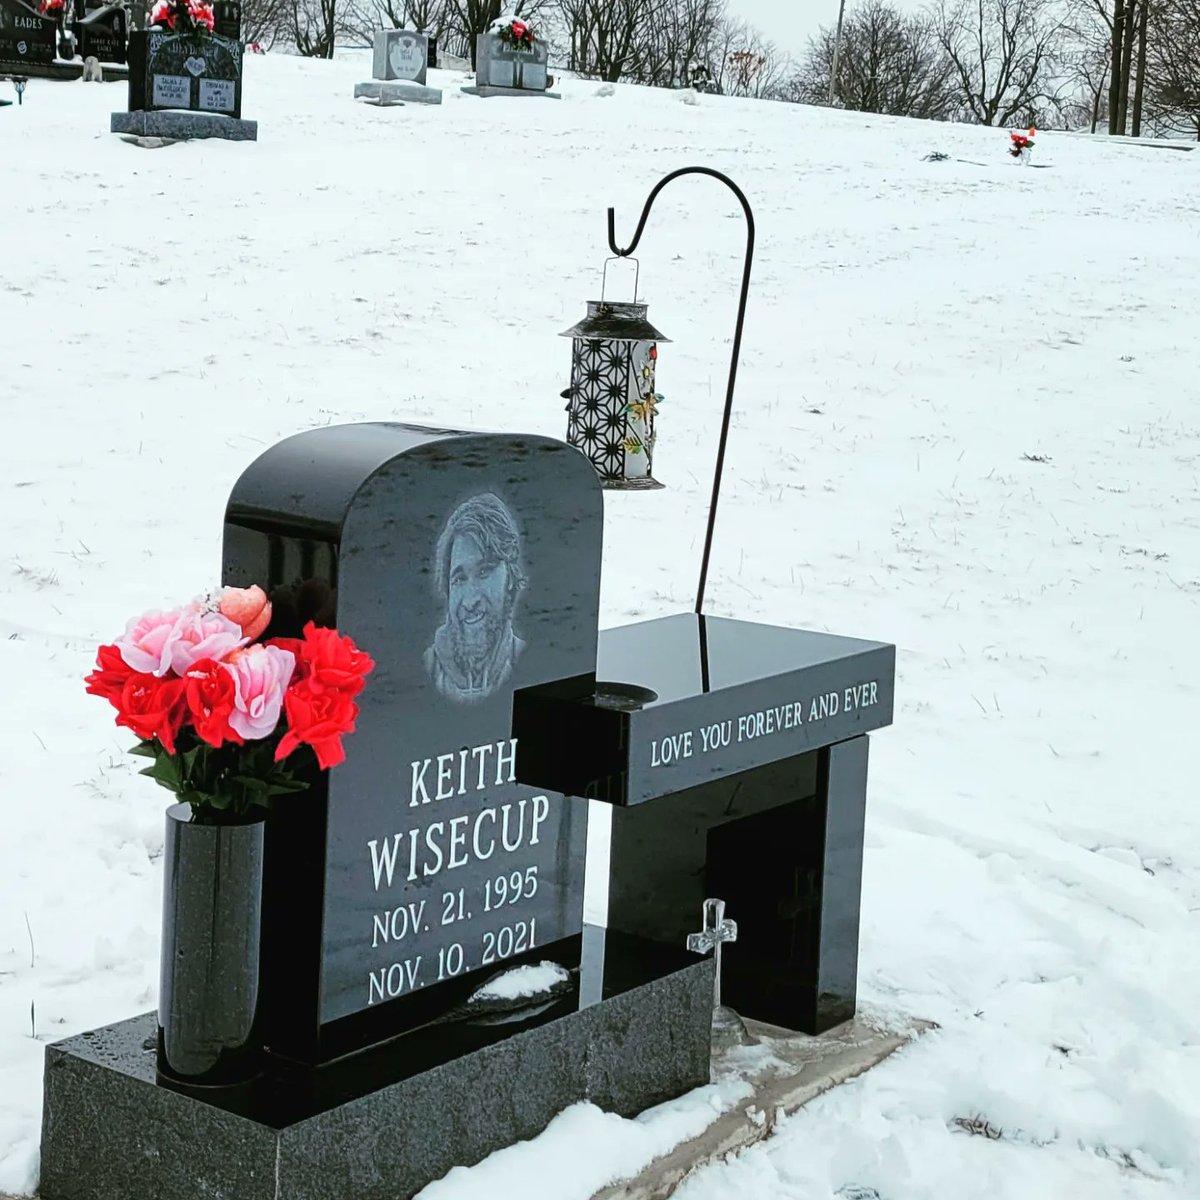 My weekly visit to my sons grave. Snow, rain, sun.. I'll always be there every single week to honor him. #covidloss #thosewelost #covidsucks #keithwisecup #CovidIsntOver